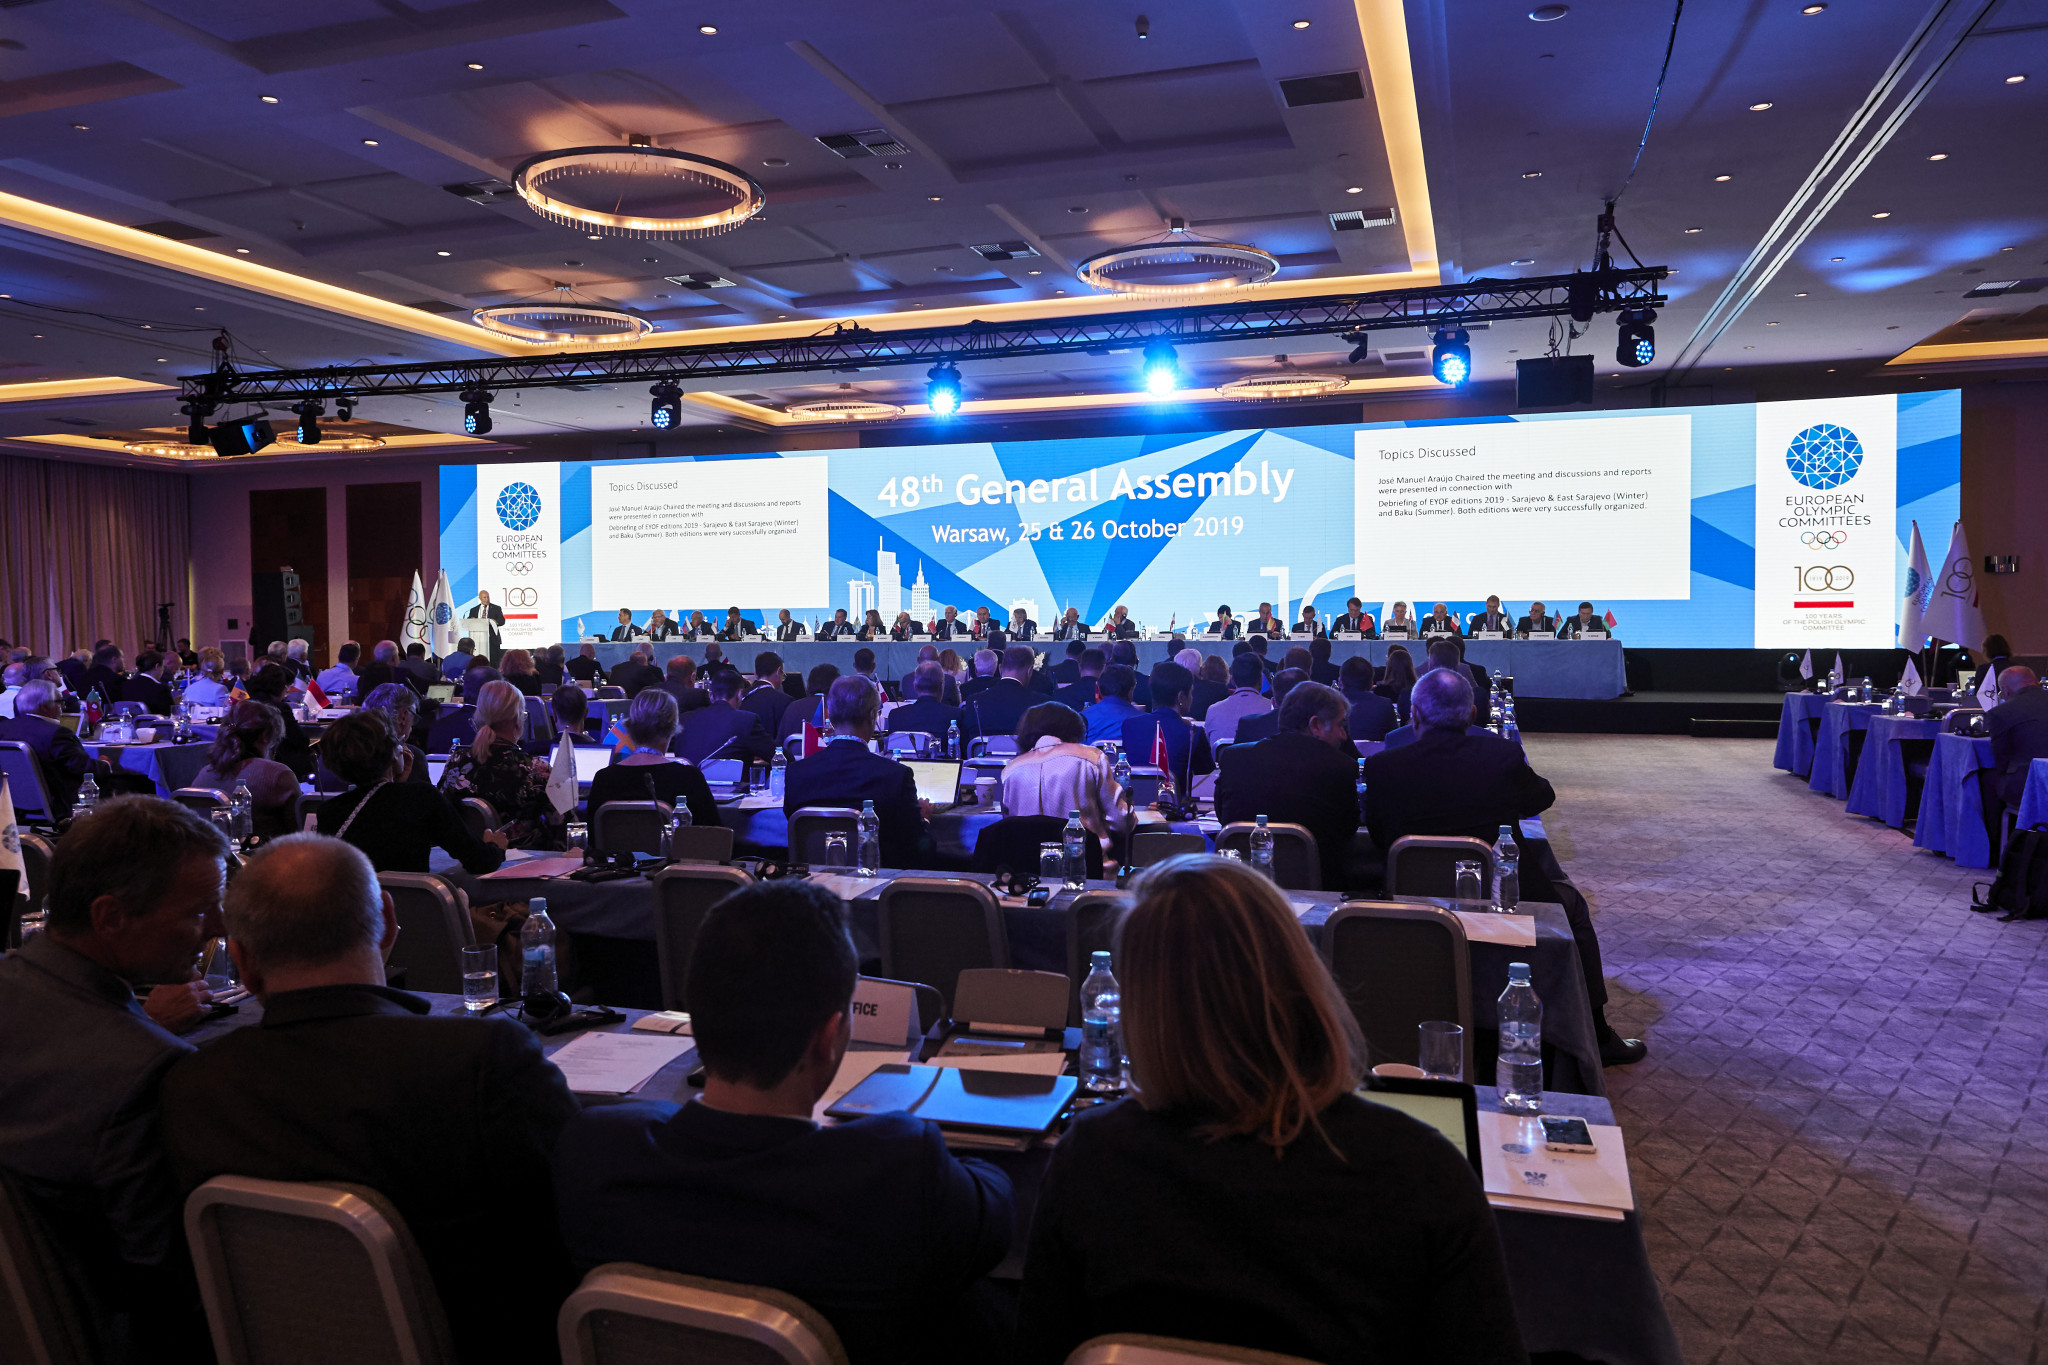 The two-day General Assembly came to close with Istanbul announced as the location for 2020 ©EOC